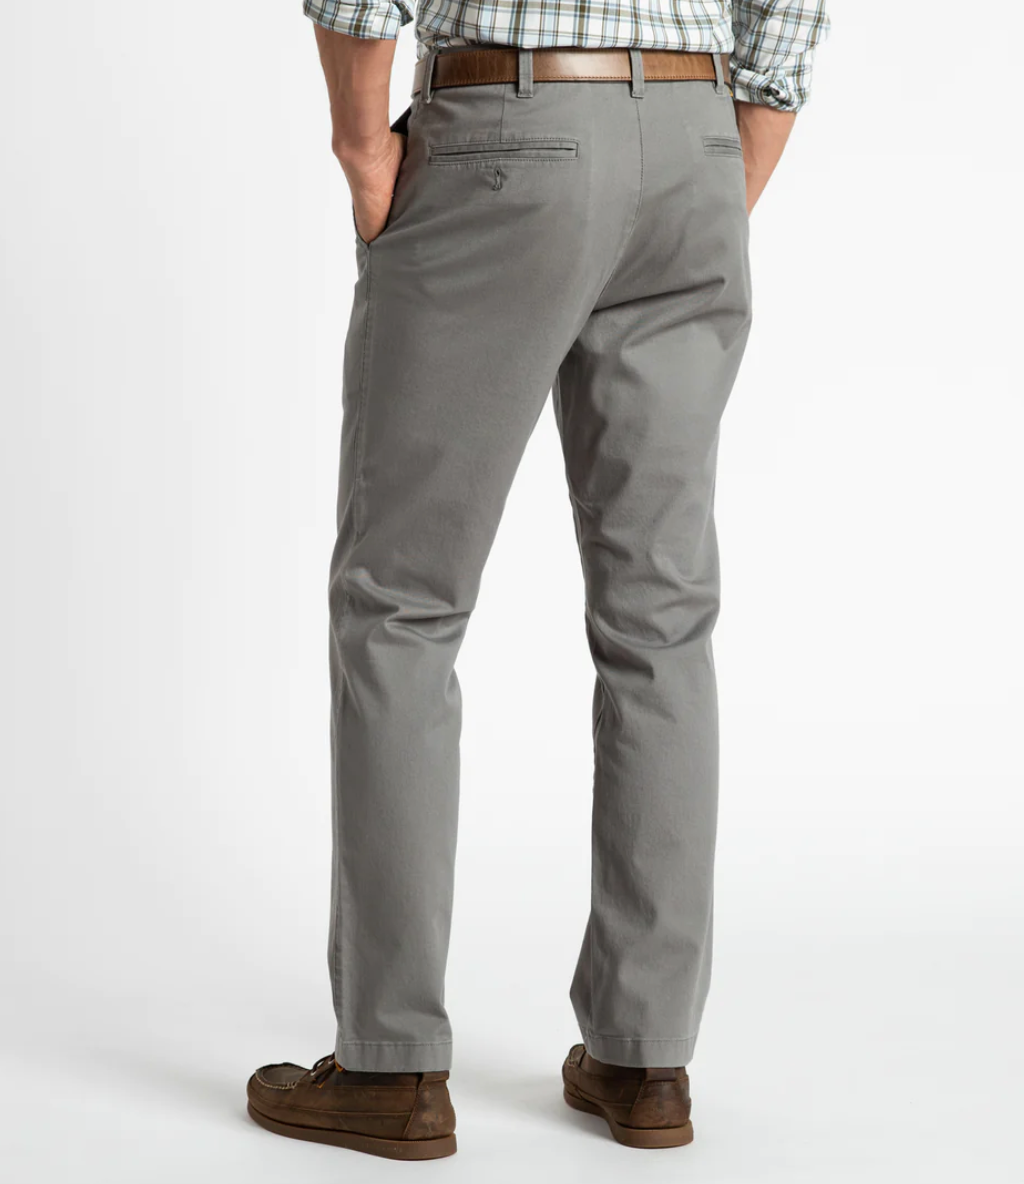 Gold School Classic Fit Chino Brushed Nickel